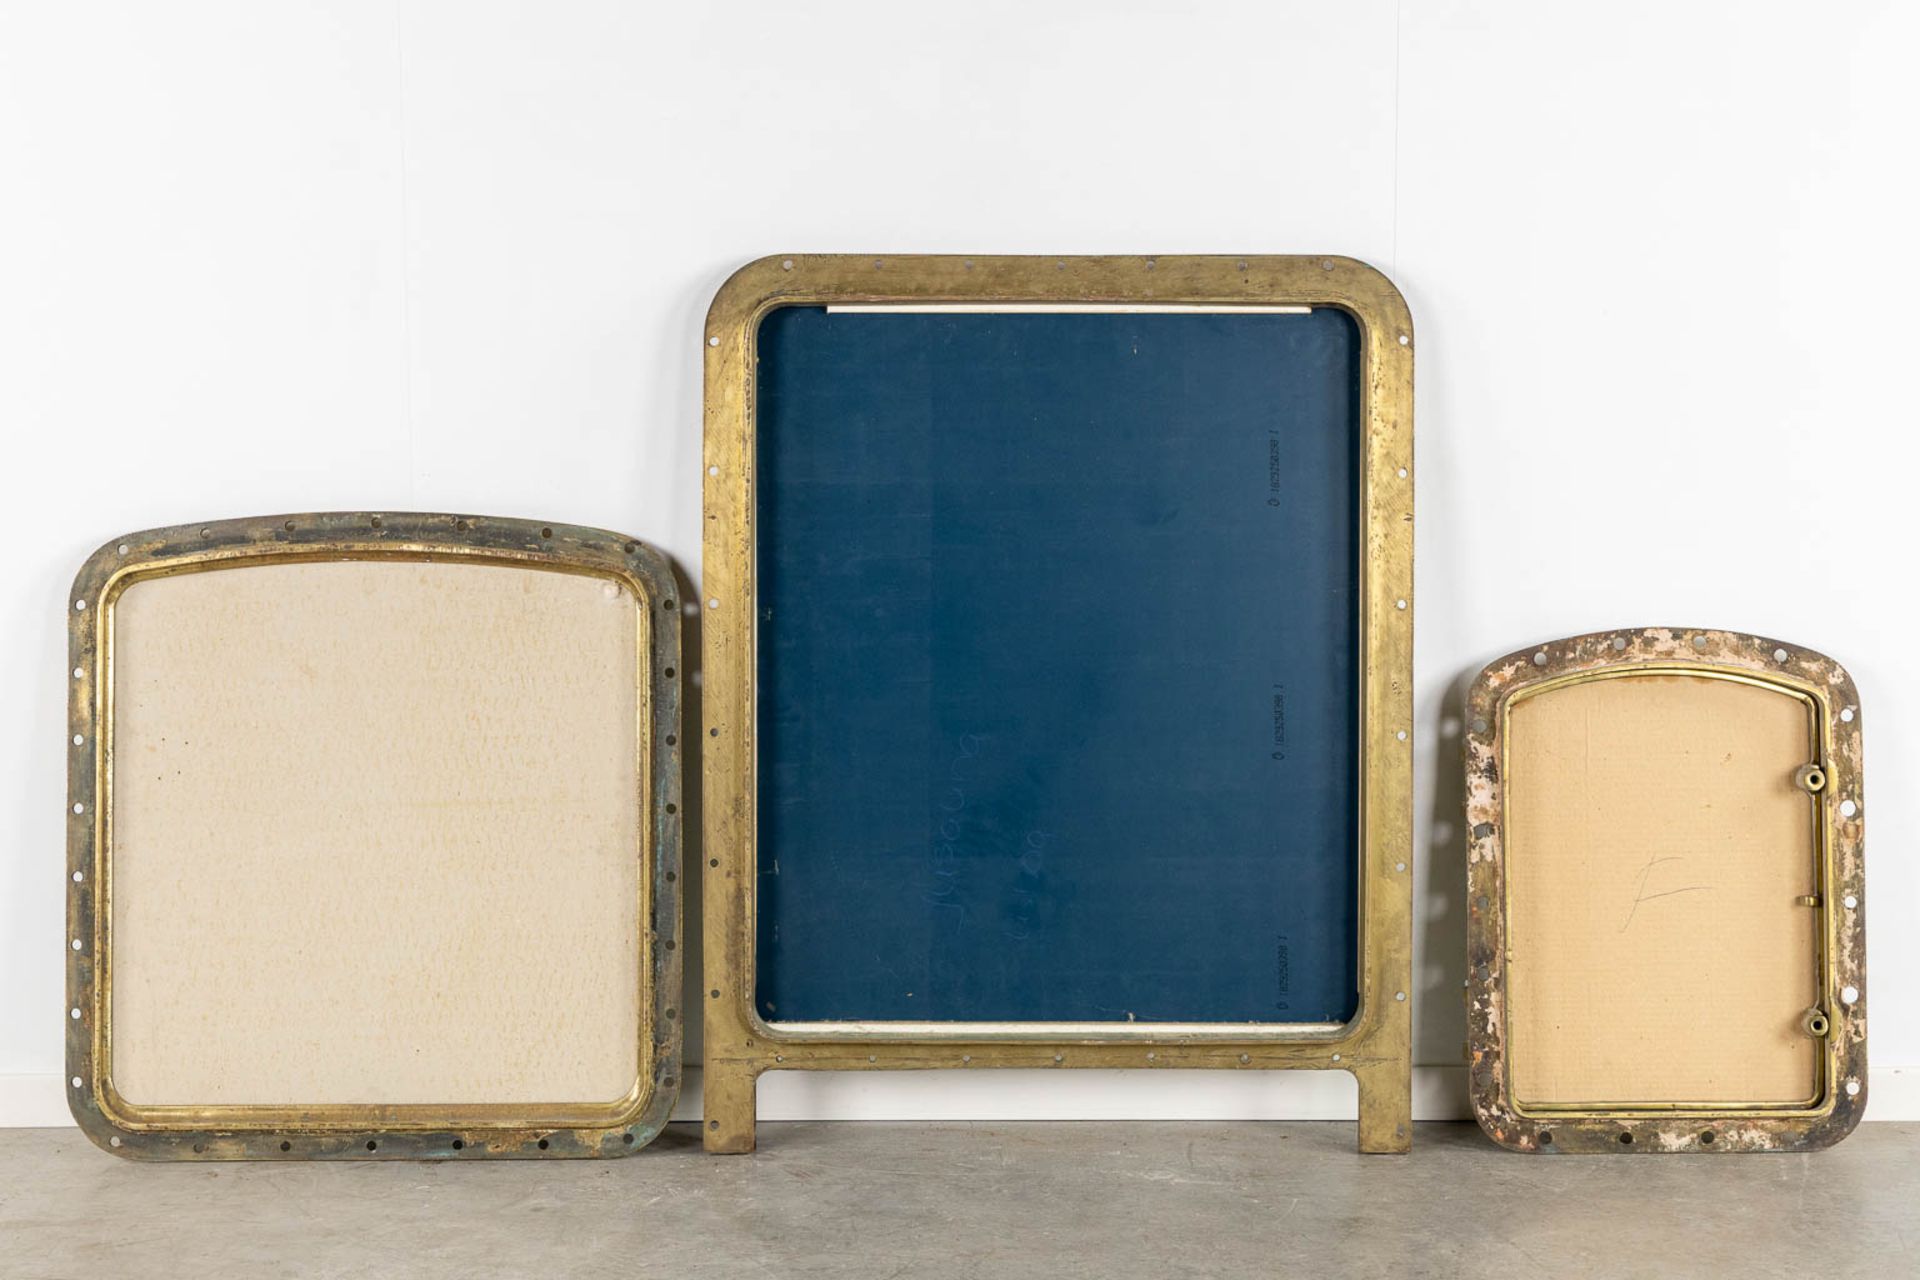 Three various Portholes, bronze and glass. Two changed into a mirror. (W:86 x H:110 cm) - Bild 7 aus 7